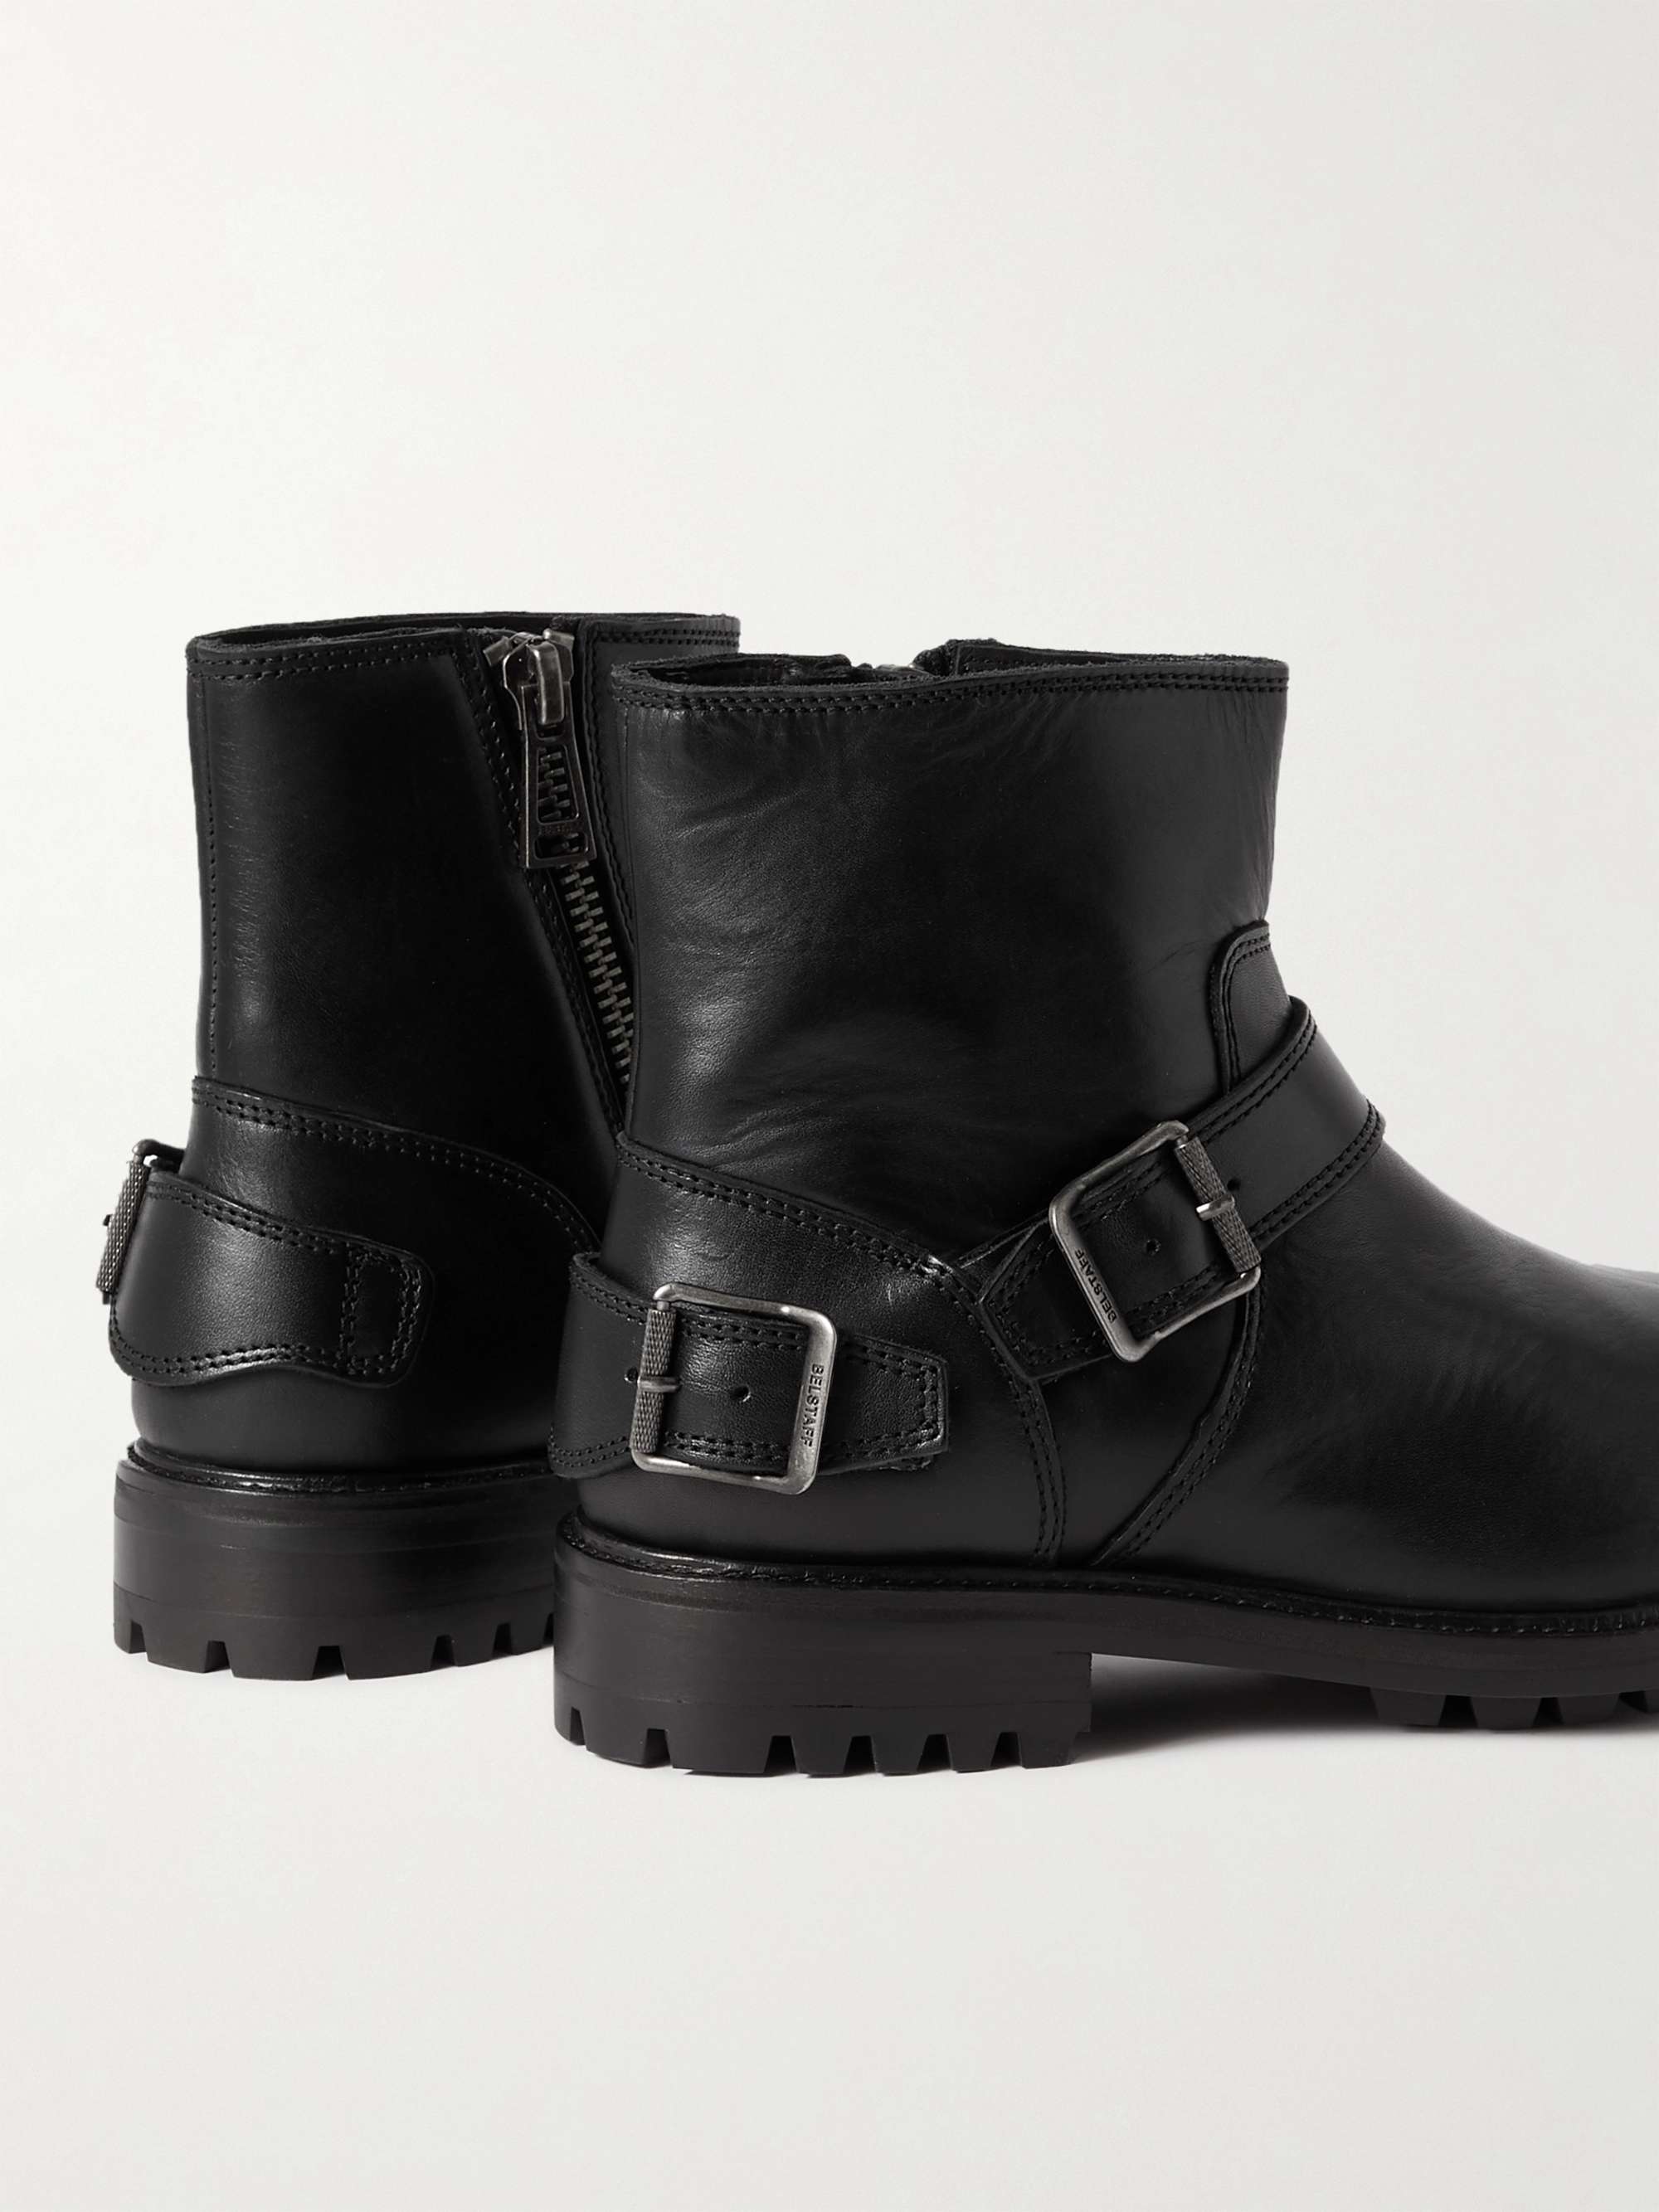 BELSTAFF Trialmaster Leather Boots